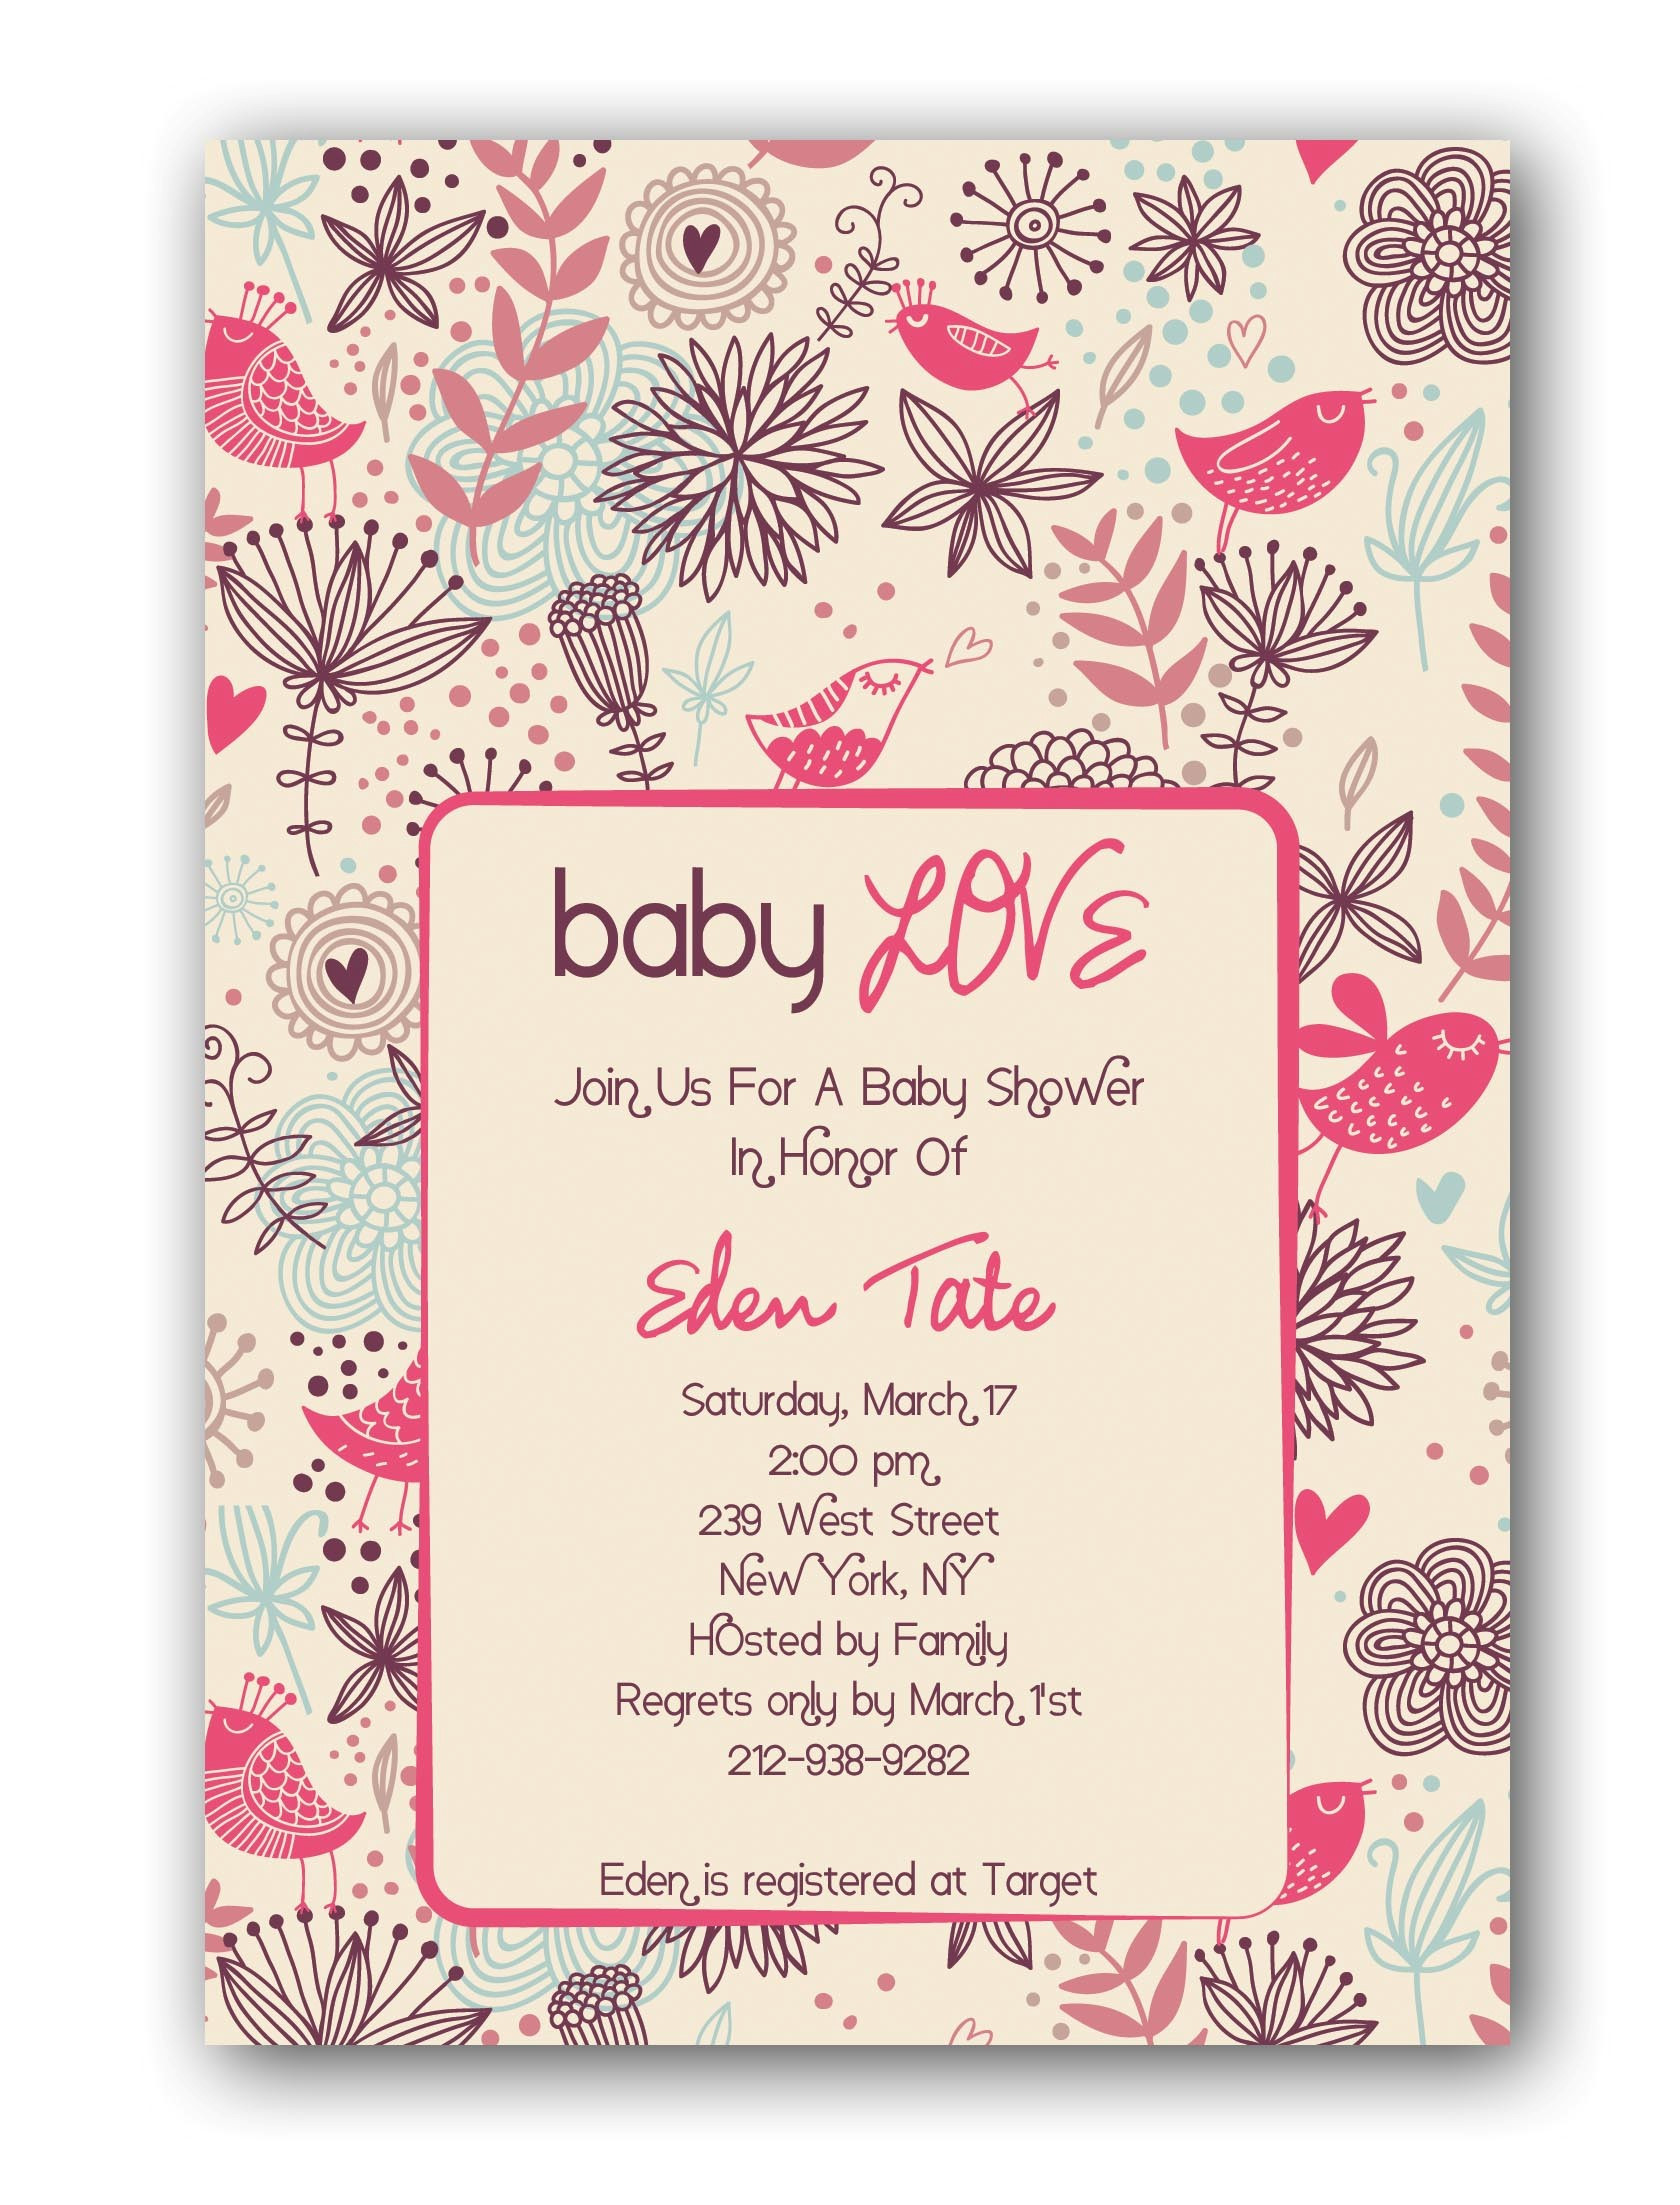 Full Size of Baby Shower:63+ Delightful Cheap Baby Shower Invitations Image Inspirations Cheap Baby Shower Invitations Baby Shower Accessories Baby Shower Rentals Arreglos Para Baby Shower Adornos De Baby Shower Baby Shower Registry Mermaid Baby Shower Invitations Awesome Invitation For Baby Shower